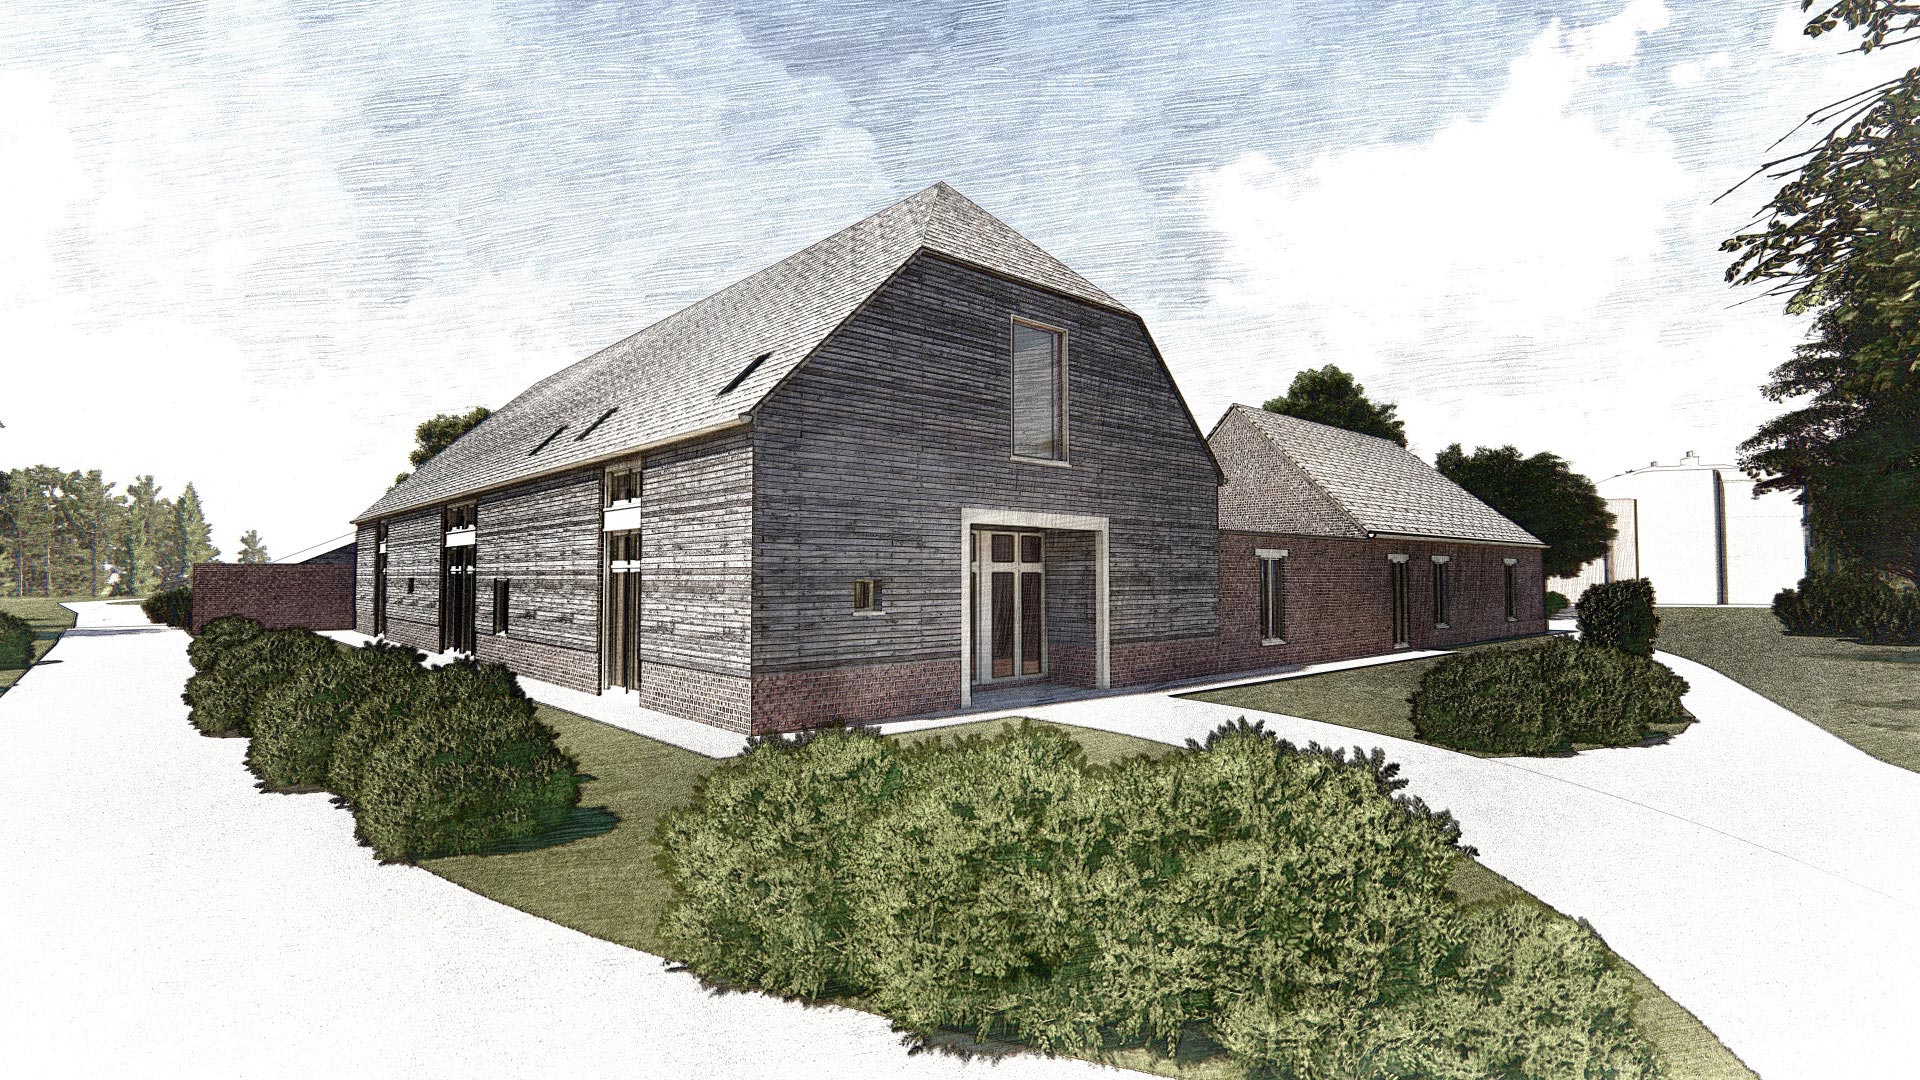 side and rear view visual of barn conversion into resort and spa